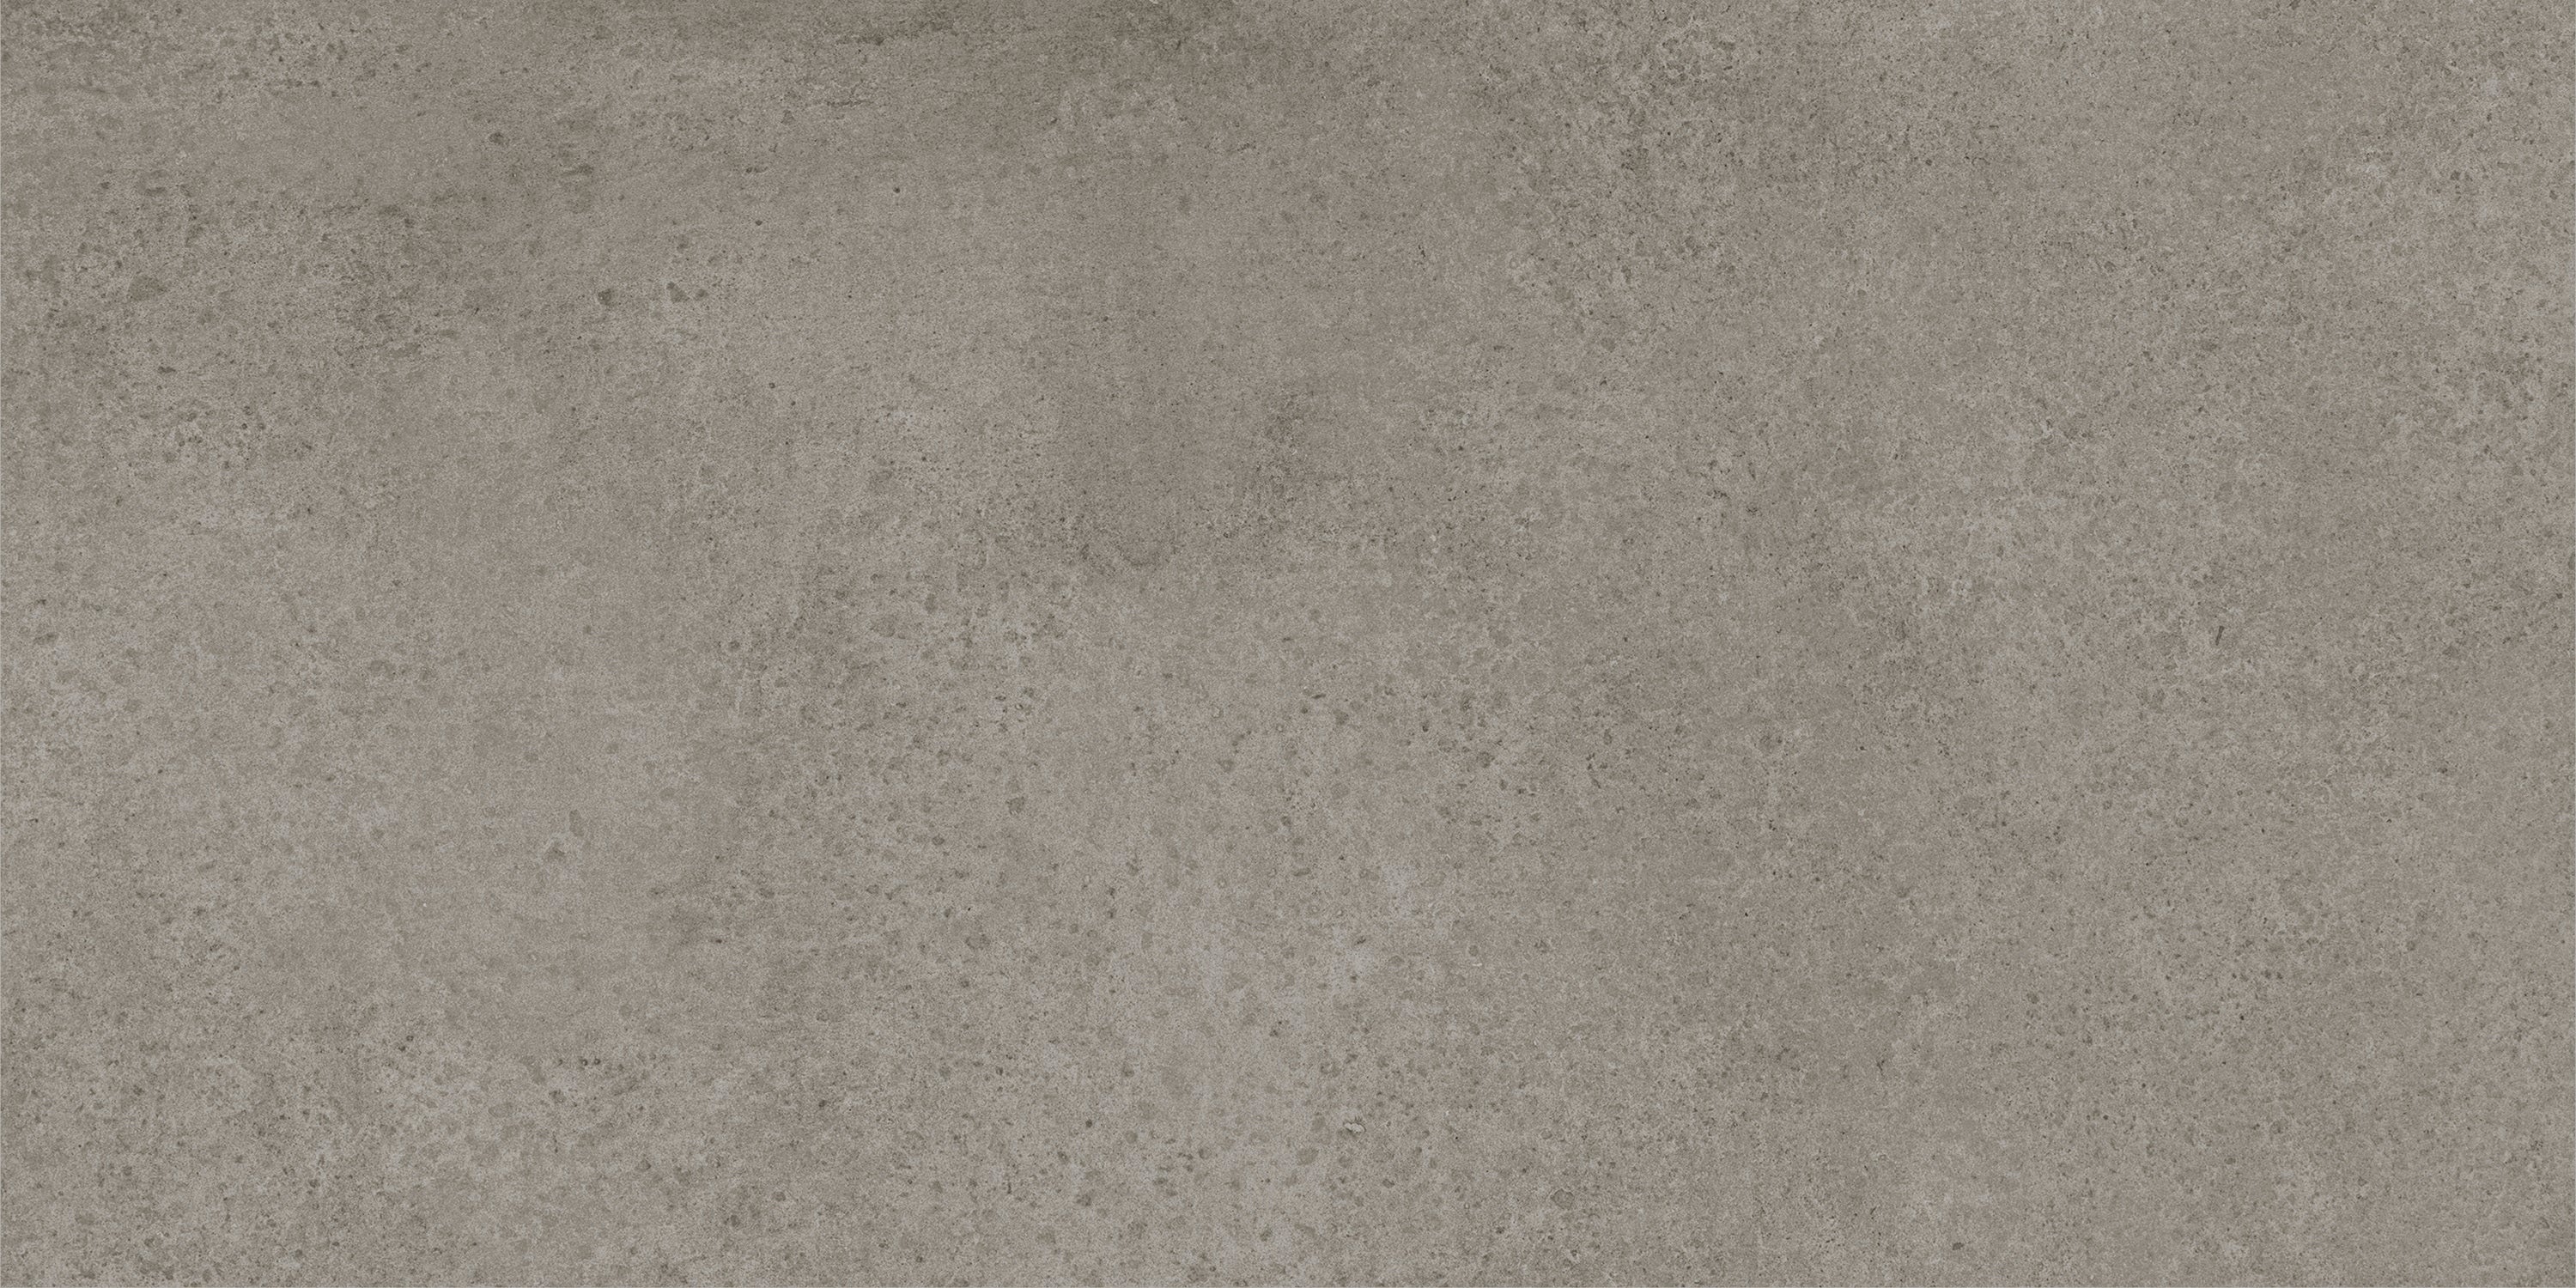 landmark 9mm madein vision grey field tile 24x48x9mm matte rectified porcelain tile distributed by surface group international